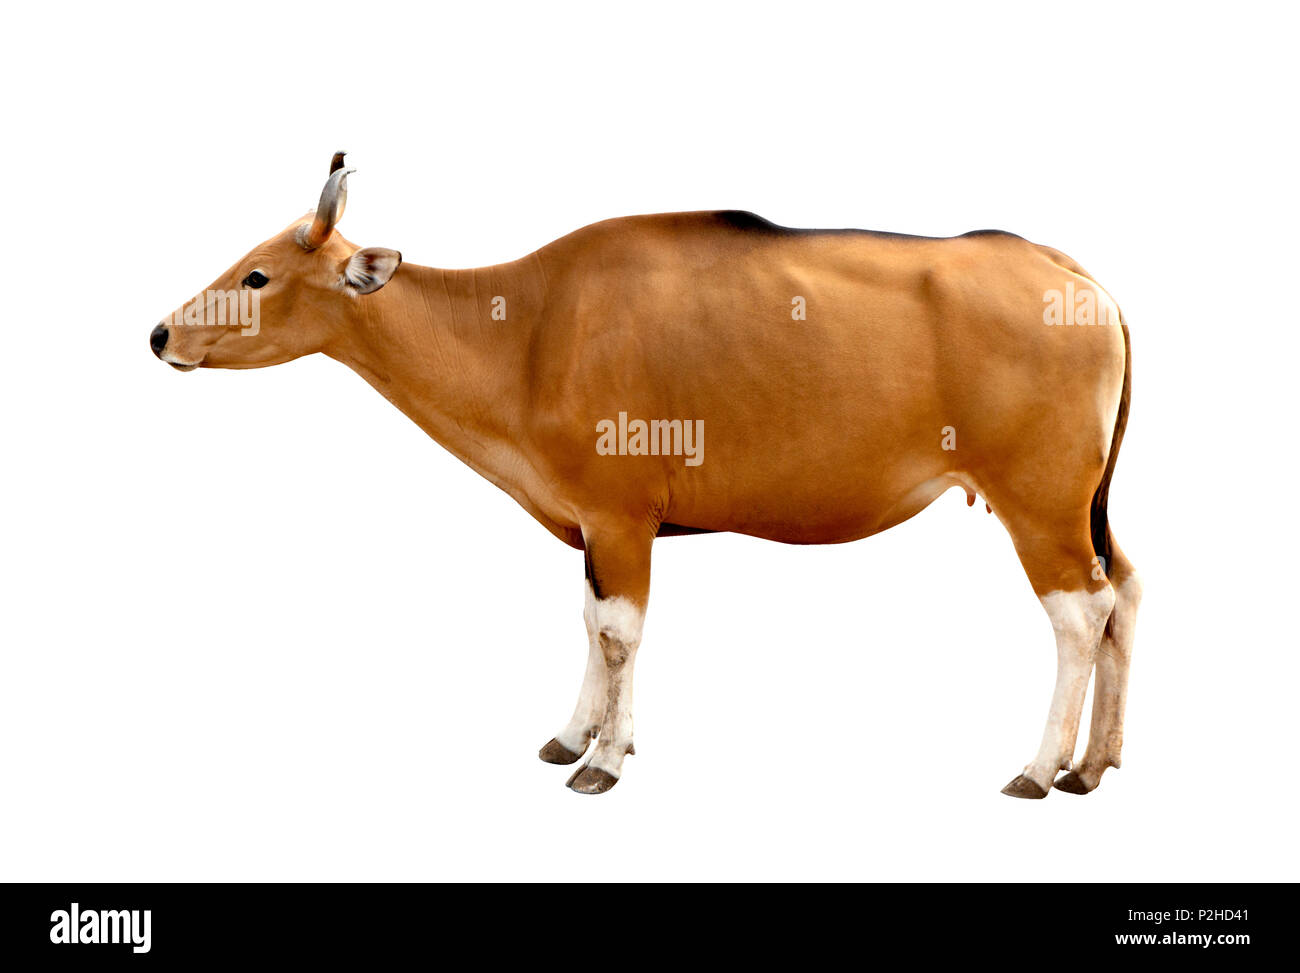 Bos javanicus Head. Red ox is a wild cow. Head on white background isolate. Stock Photo